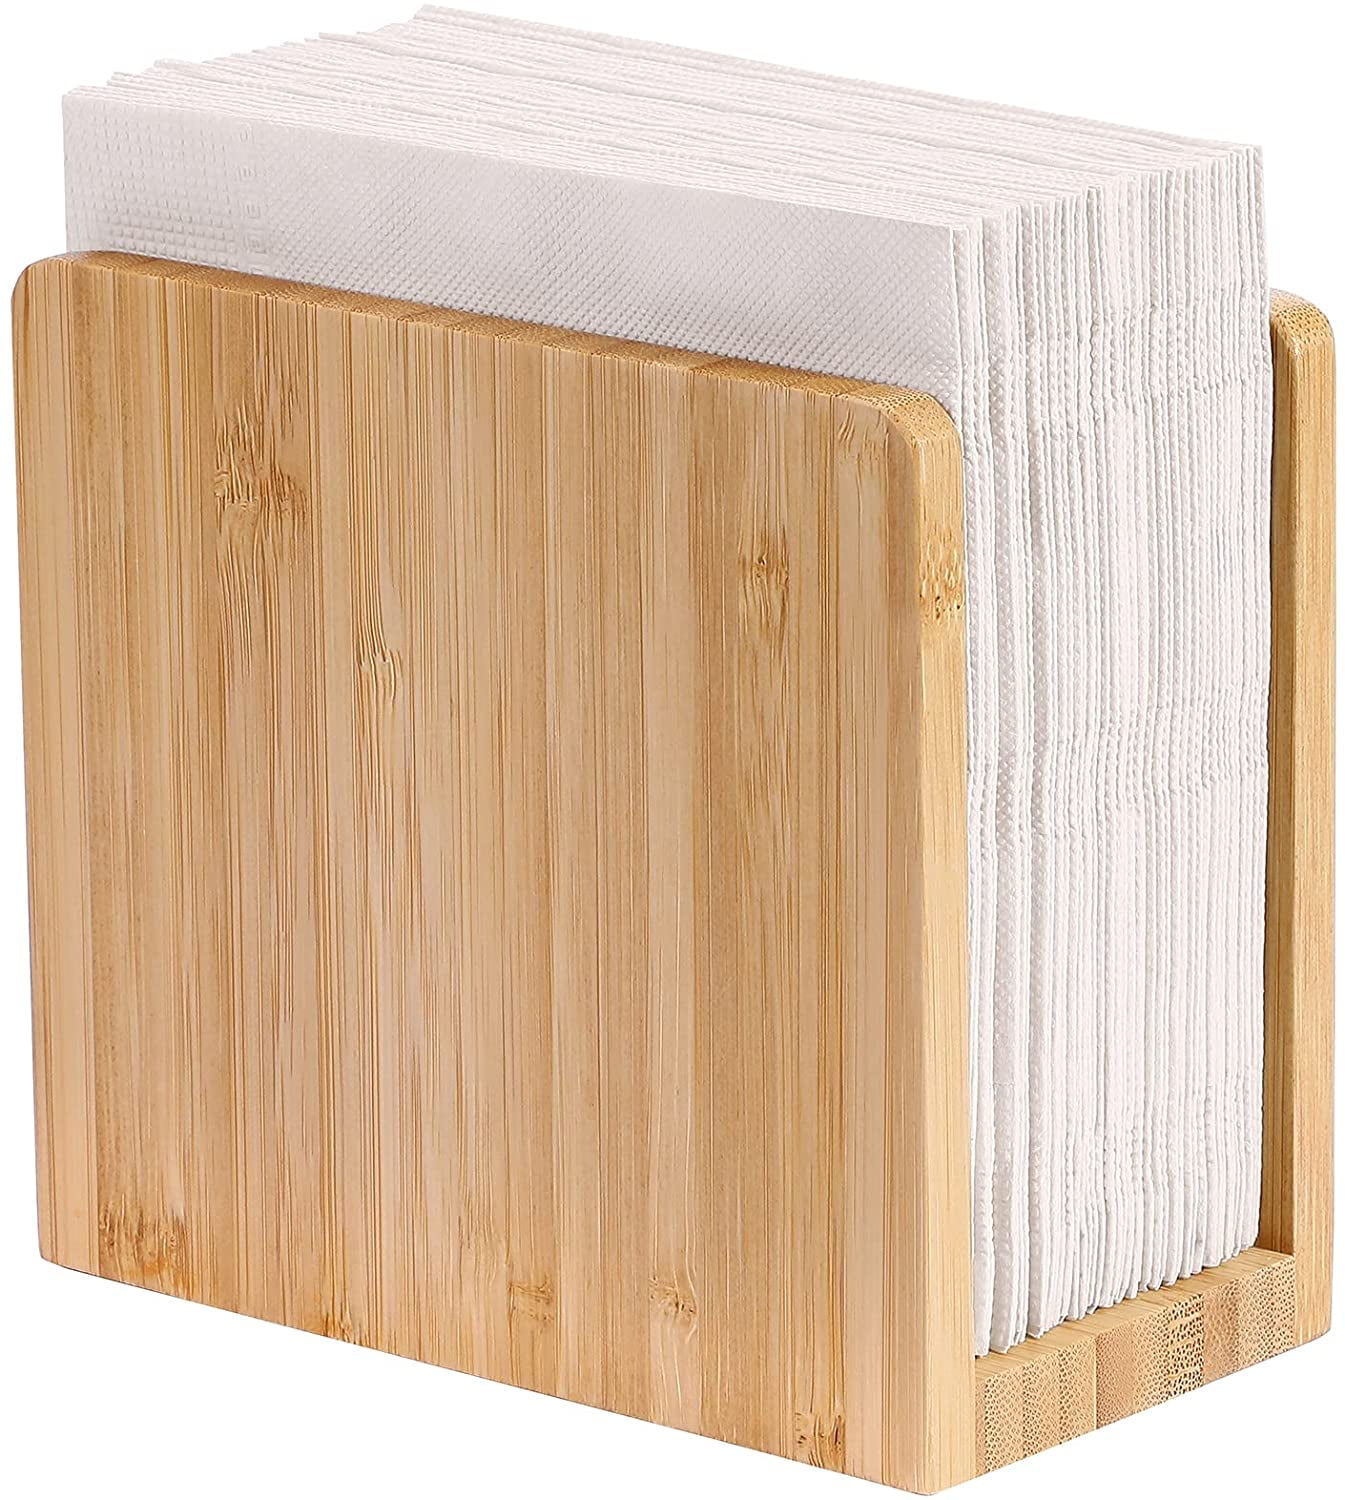 Niciksty Bamboo Napkin Holder Rustic Farmhouse Bamboo Napkin Holder Bamboo Dinner Napkin Dispenser for Kitchen and Countertop for House Dining Table Hotel Restaurant Kitchen Banquet 